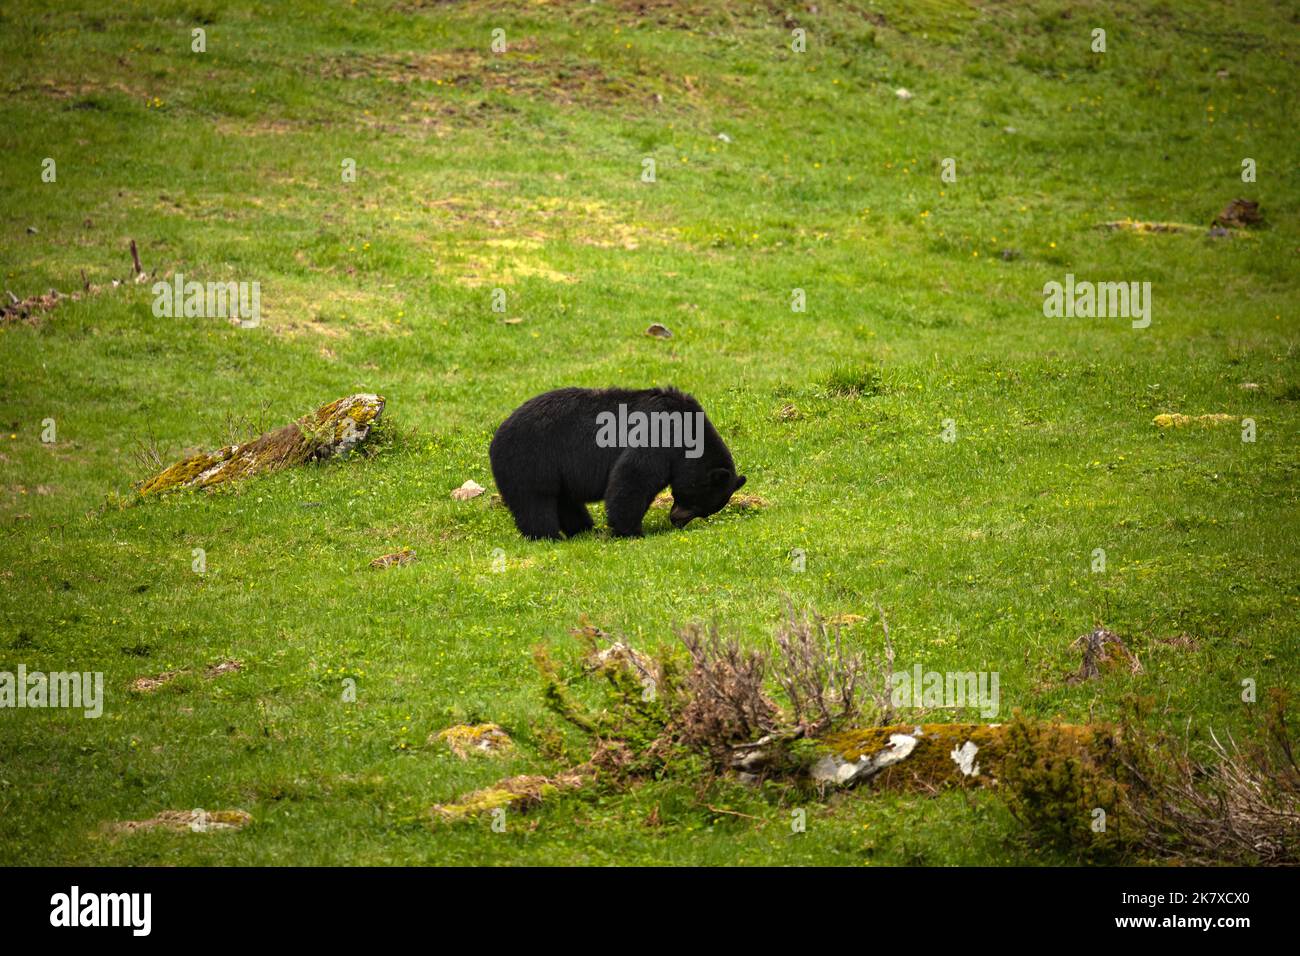 WA22368-00...WASHINGTON - Black bear recently out of hibernation looking for grass, leaves or flowers to eat in an open meadow in the Enchanted Valley Stock Photo